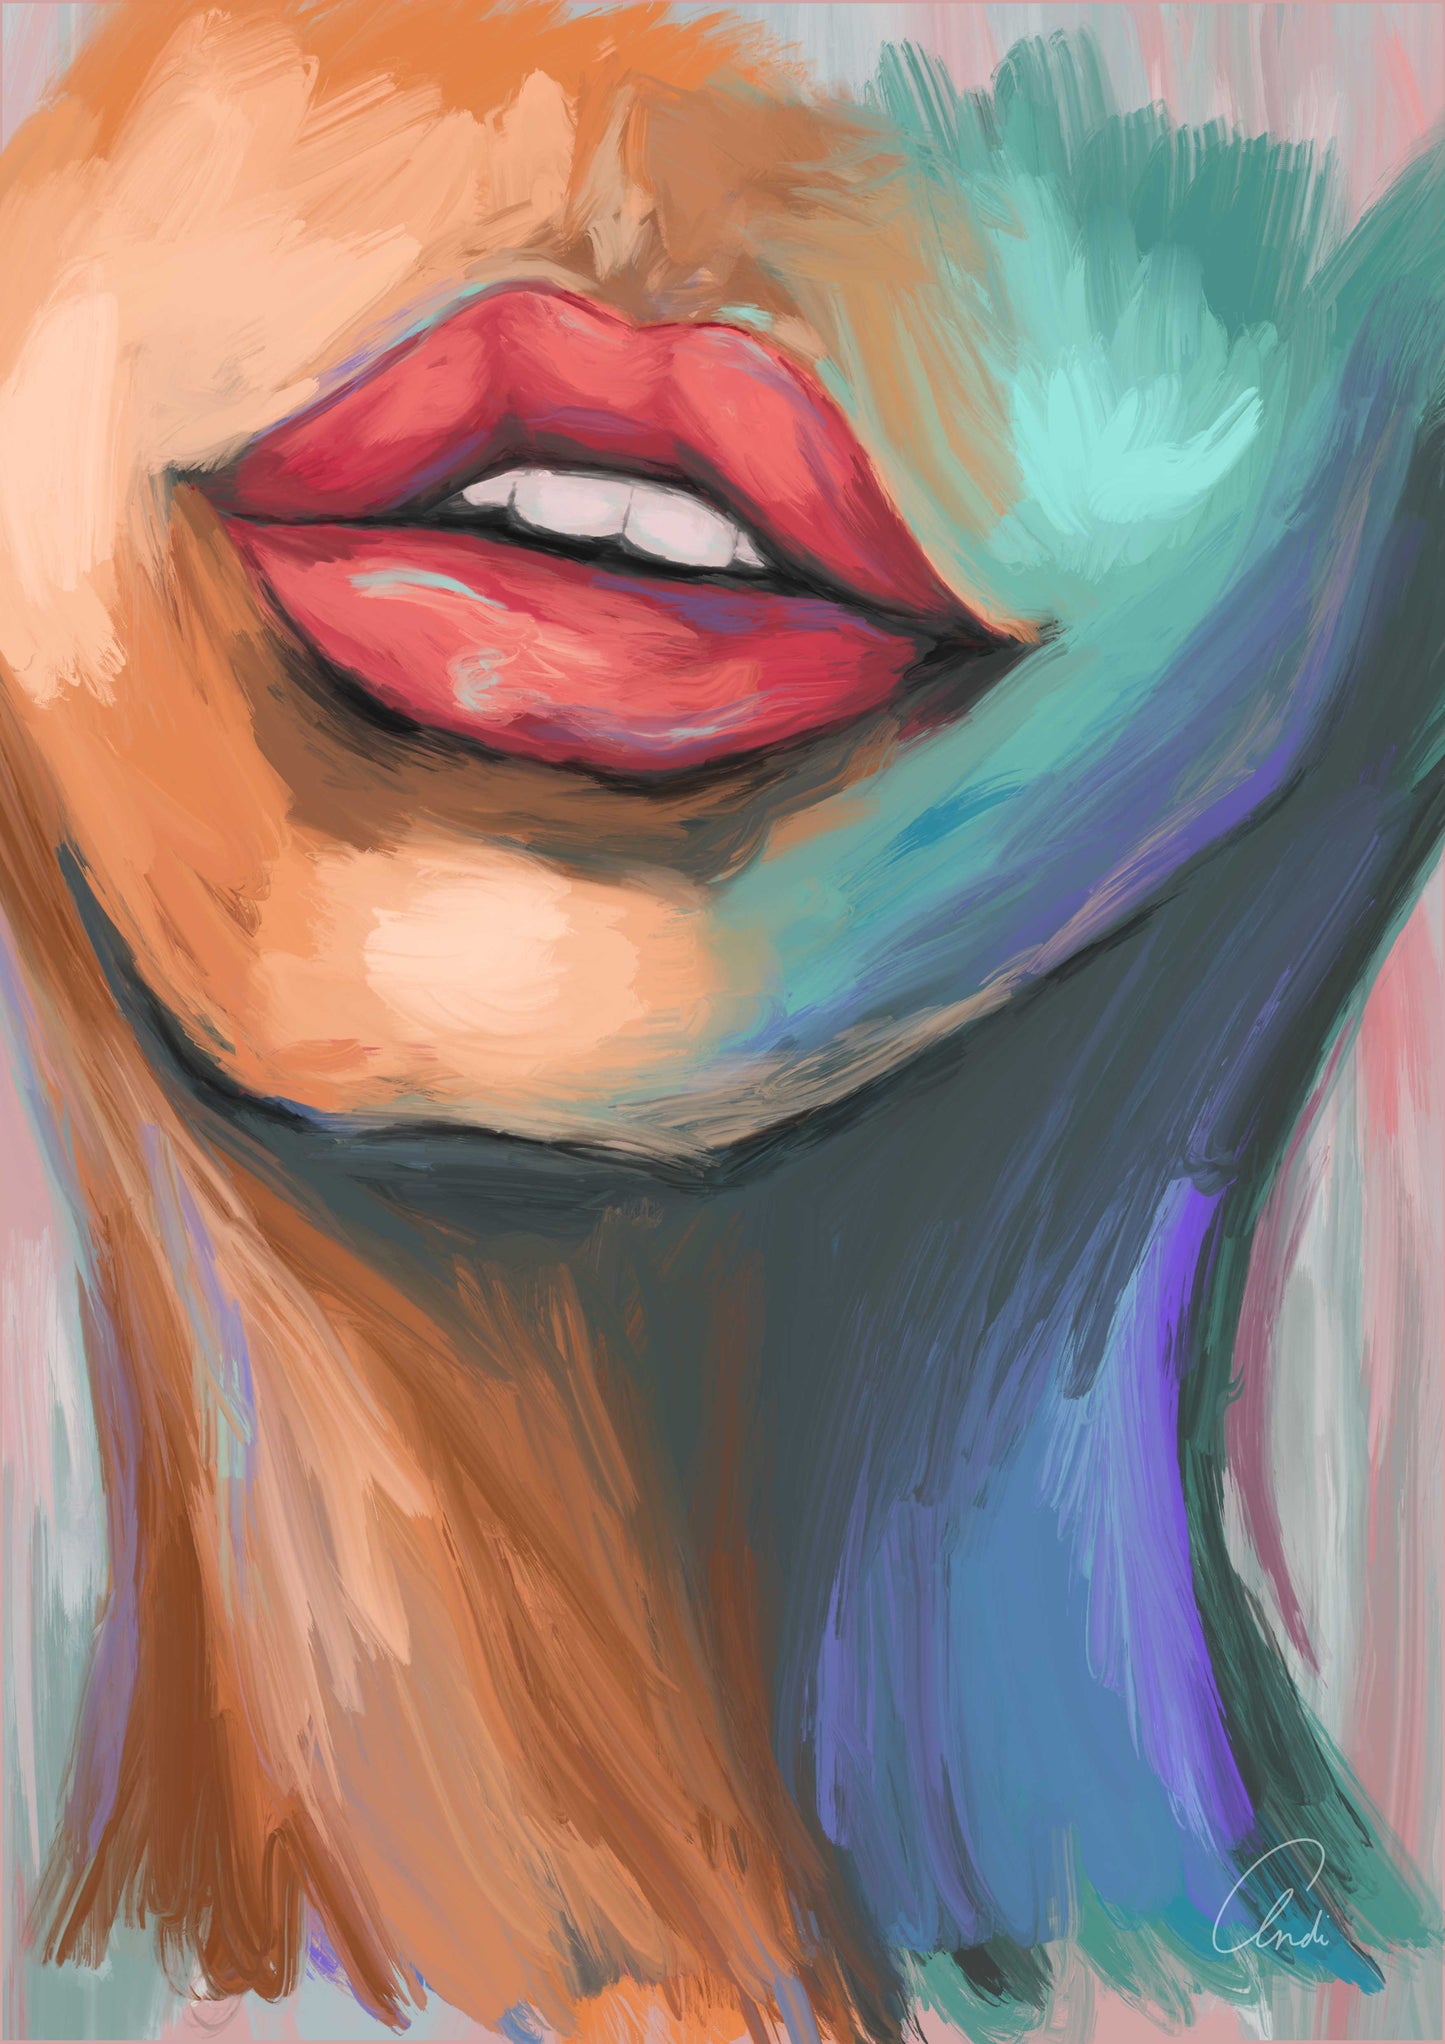 Oil Painting Female Lips Print | Poster Decor Wall Art Print | A2 A3 A4